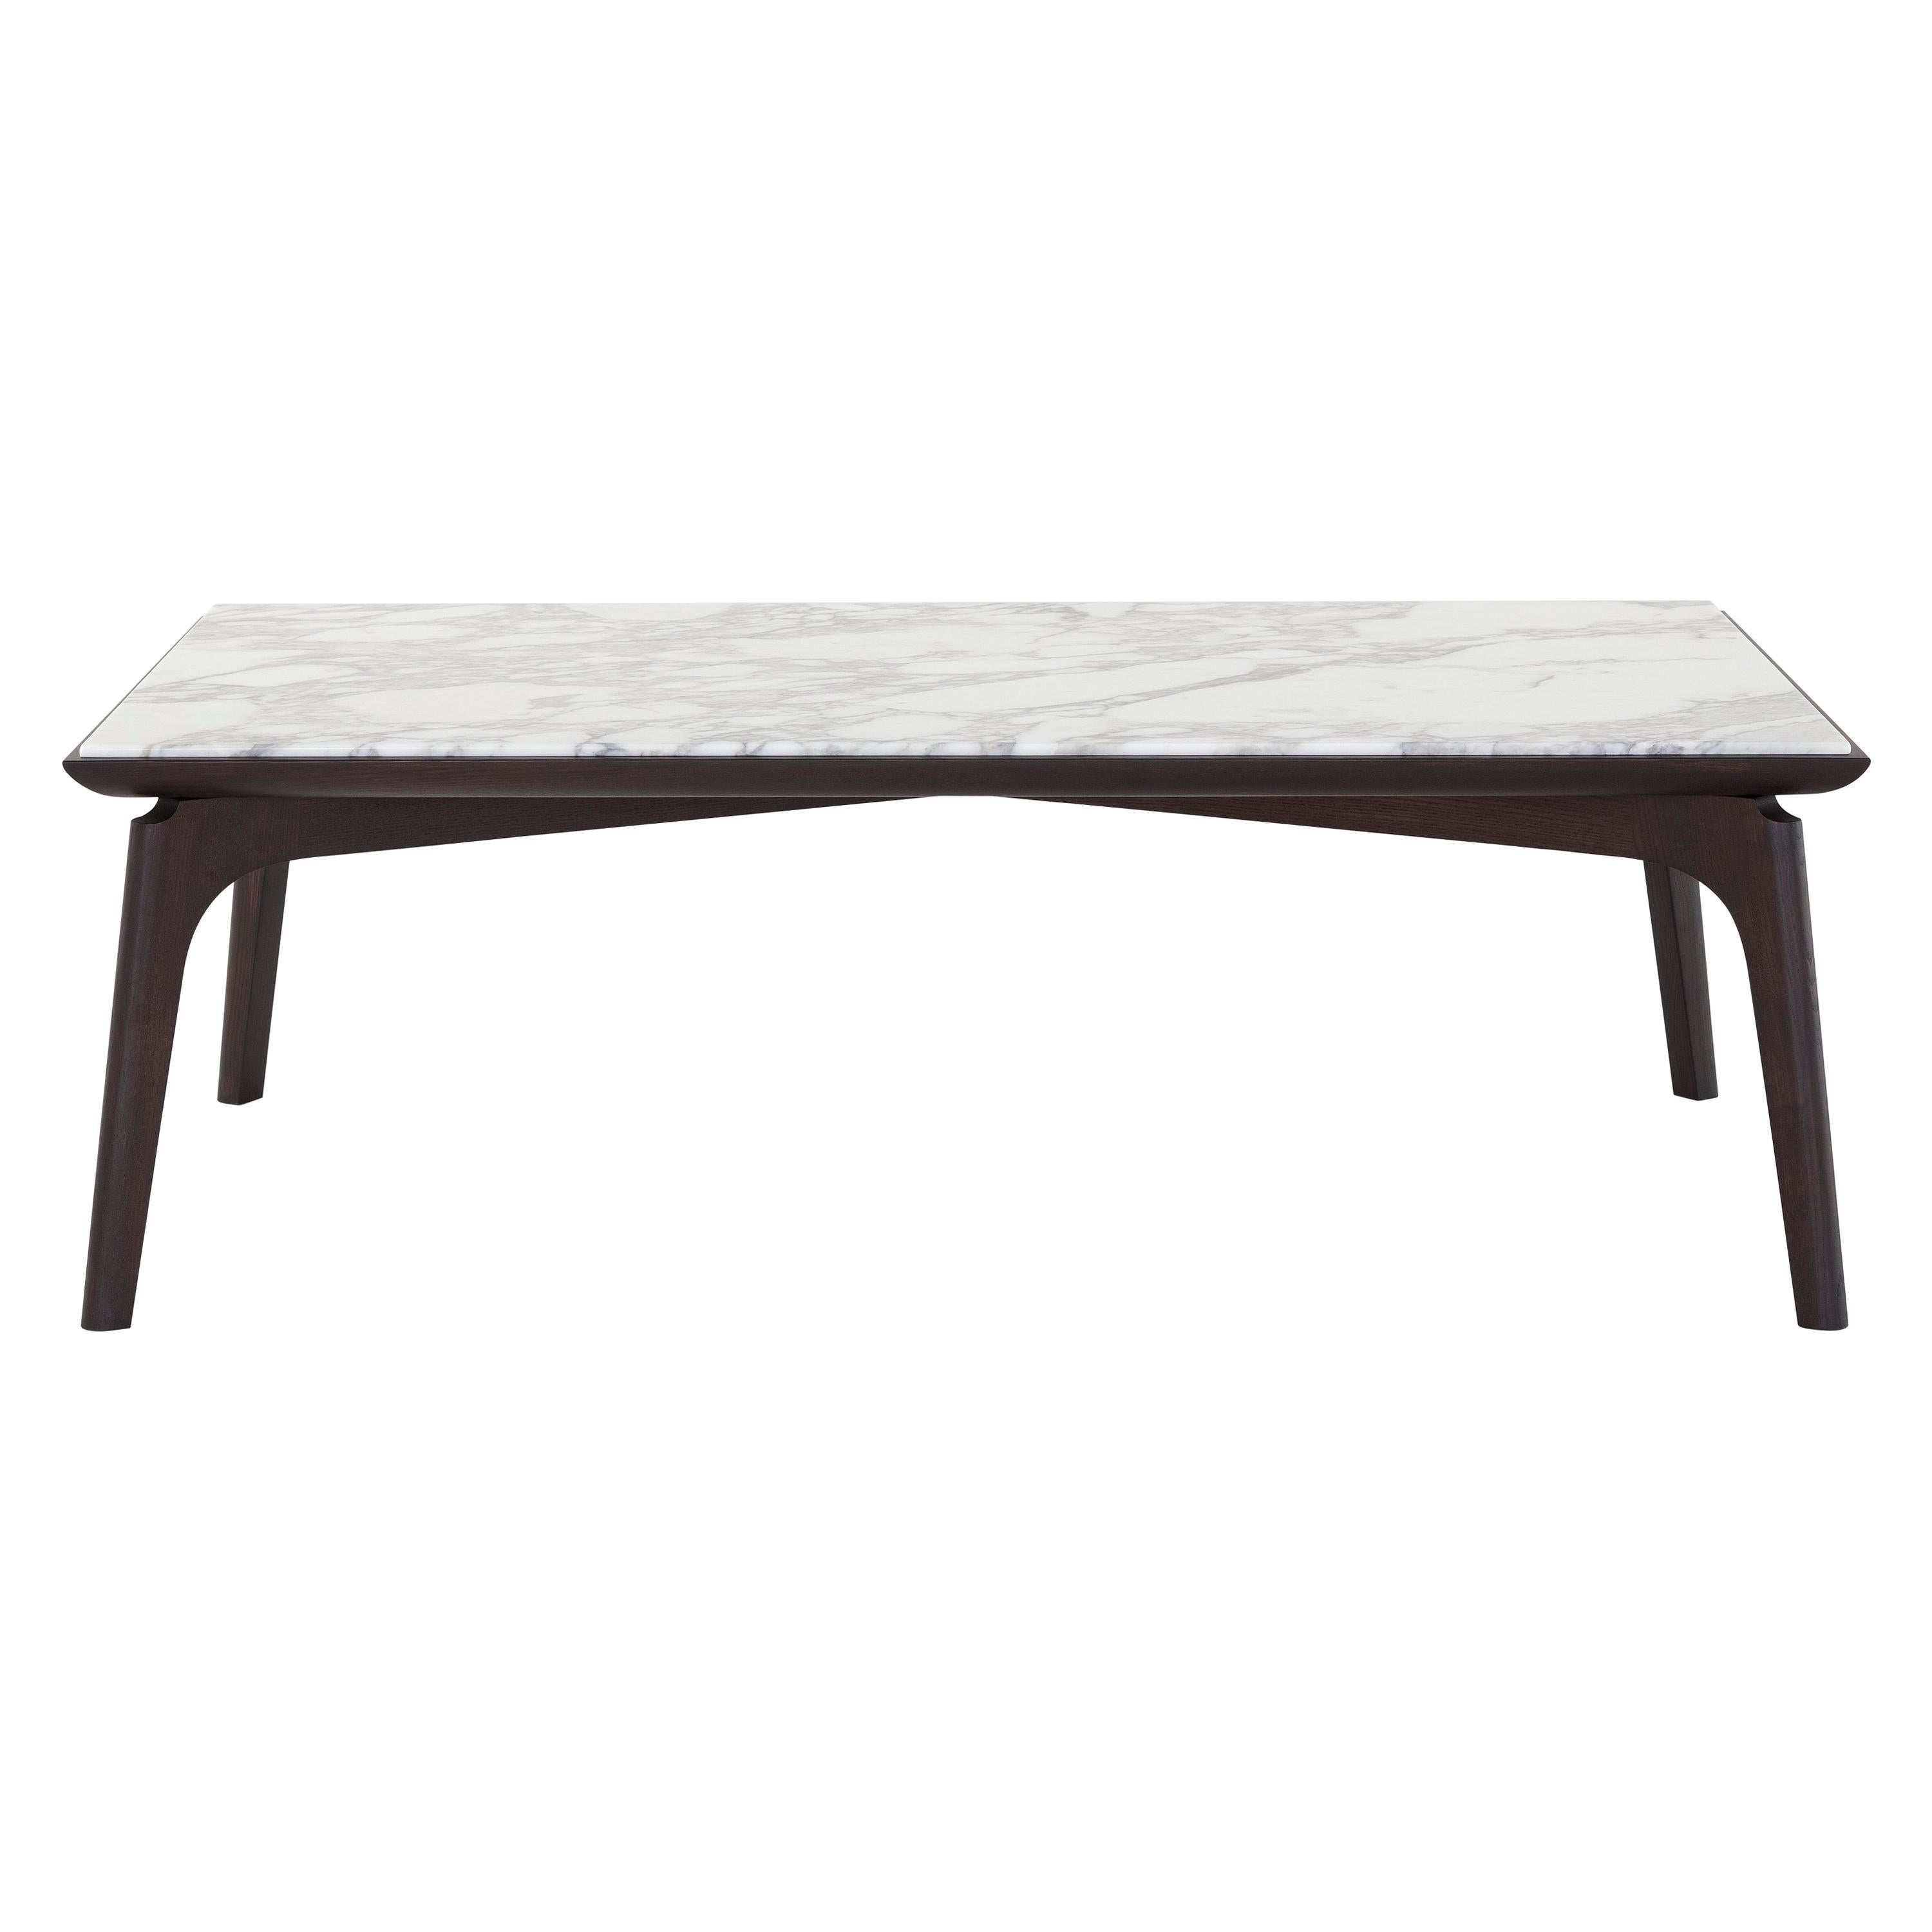 Amura Olga Coffee Table in Dark Oak Base and Arabescato Marble Top by Amuralab For Sale